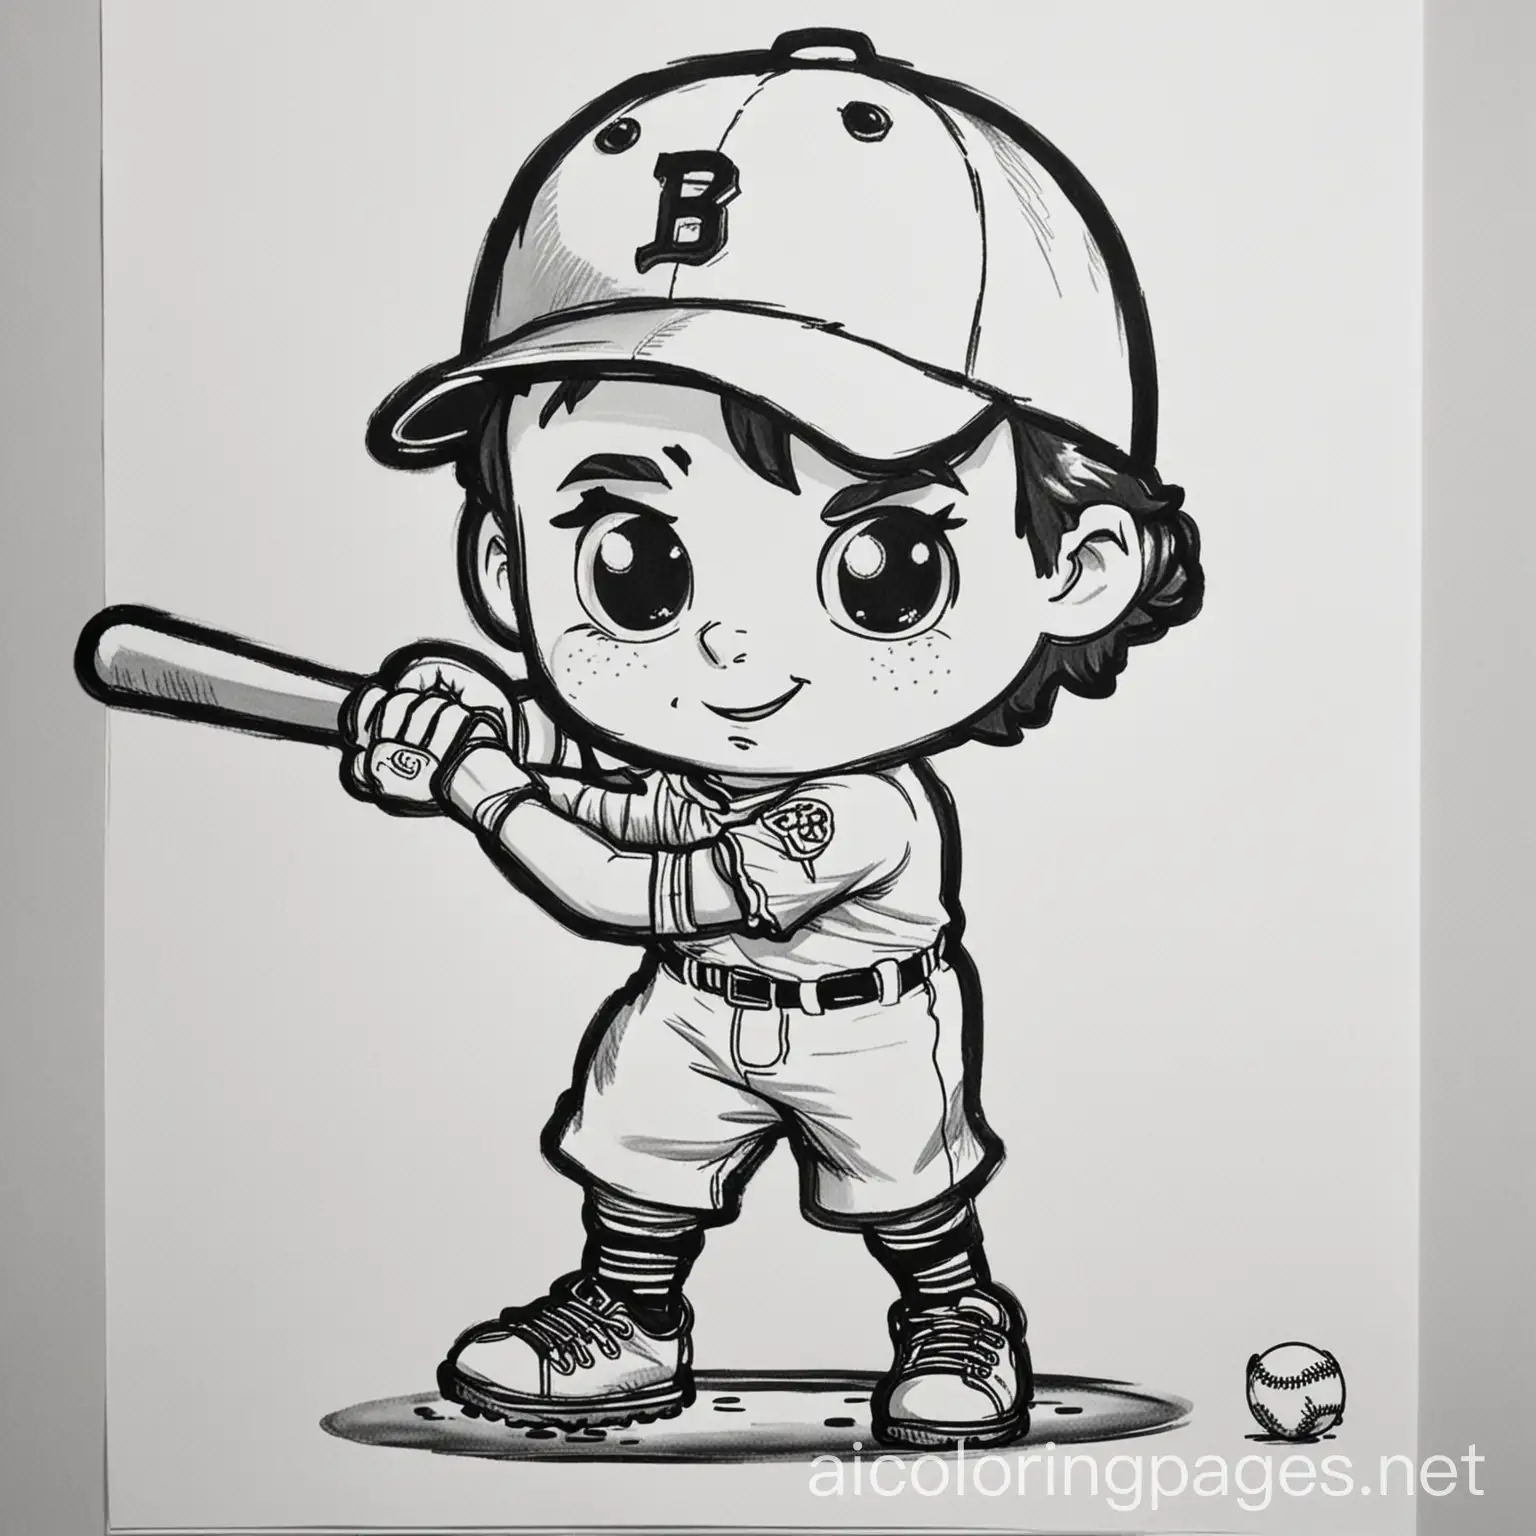 coloring page black and white with ample spaces to color of a baseball team in action, Coloring Page, black and white, line art, white background, Simplicity, Ample White Space. The background of the coloring page is plain white to make it easy for young children to color within the lines. The outlines of all the subjects are easy to distinguish, making it simple for kids to color without too much difficulty